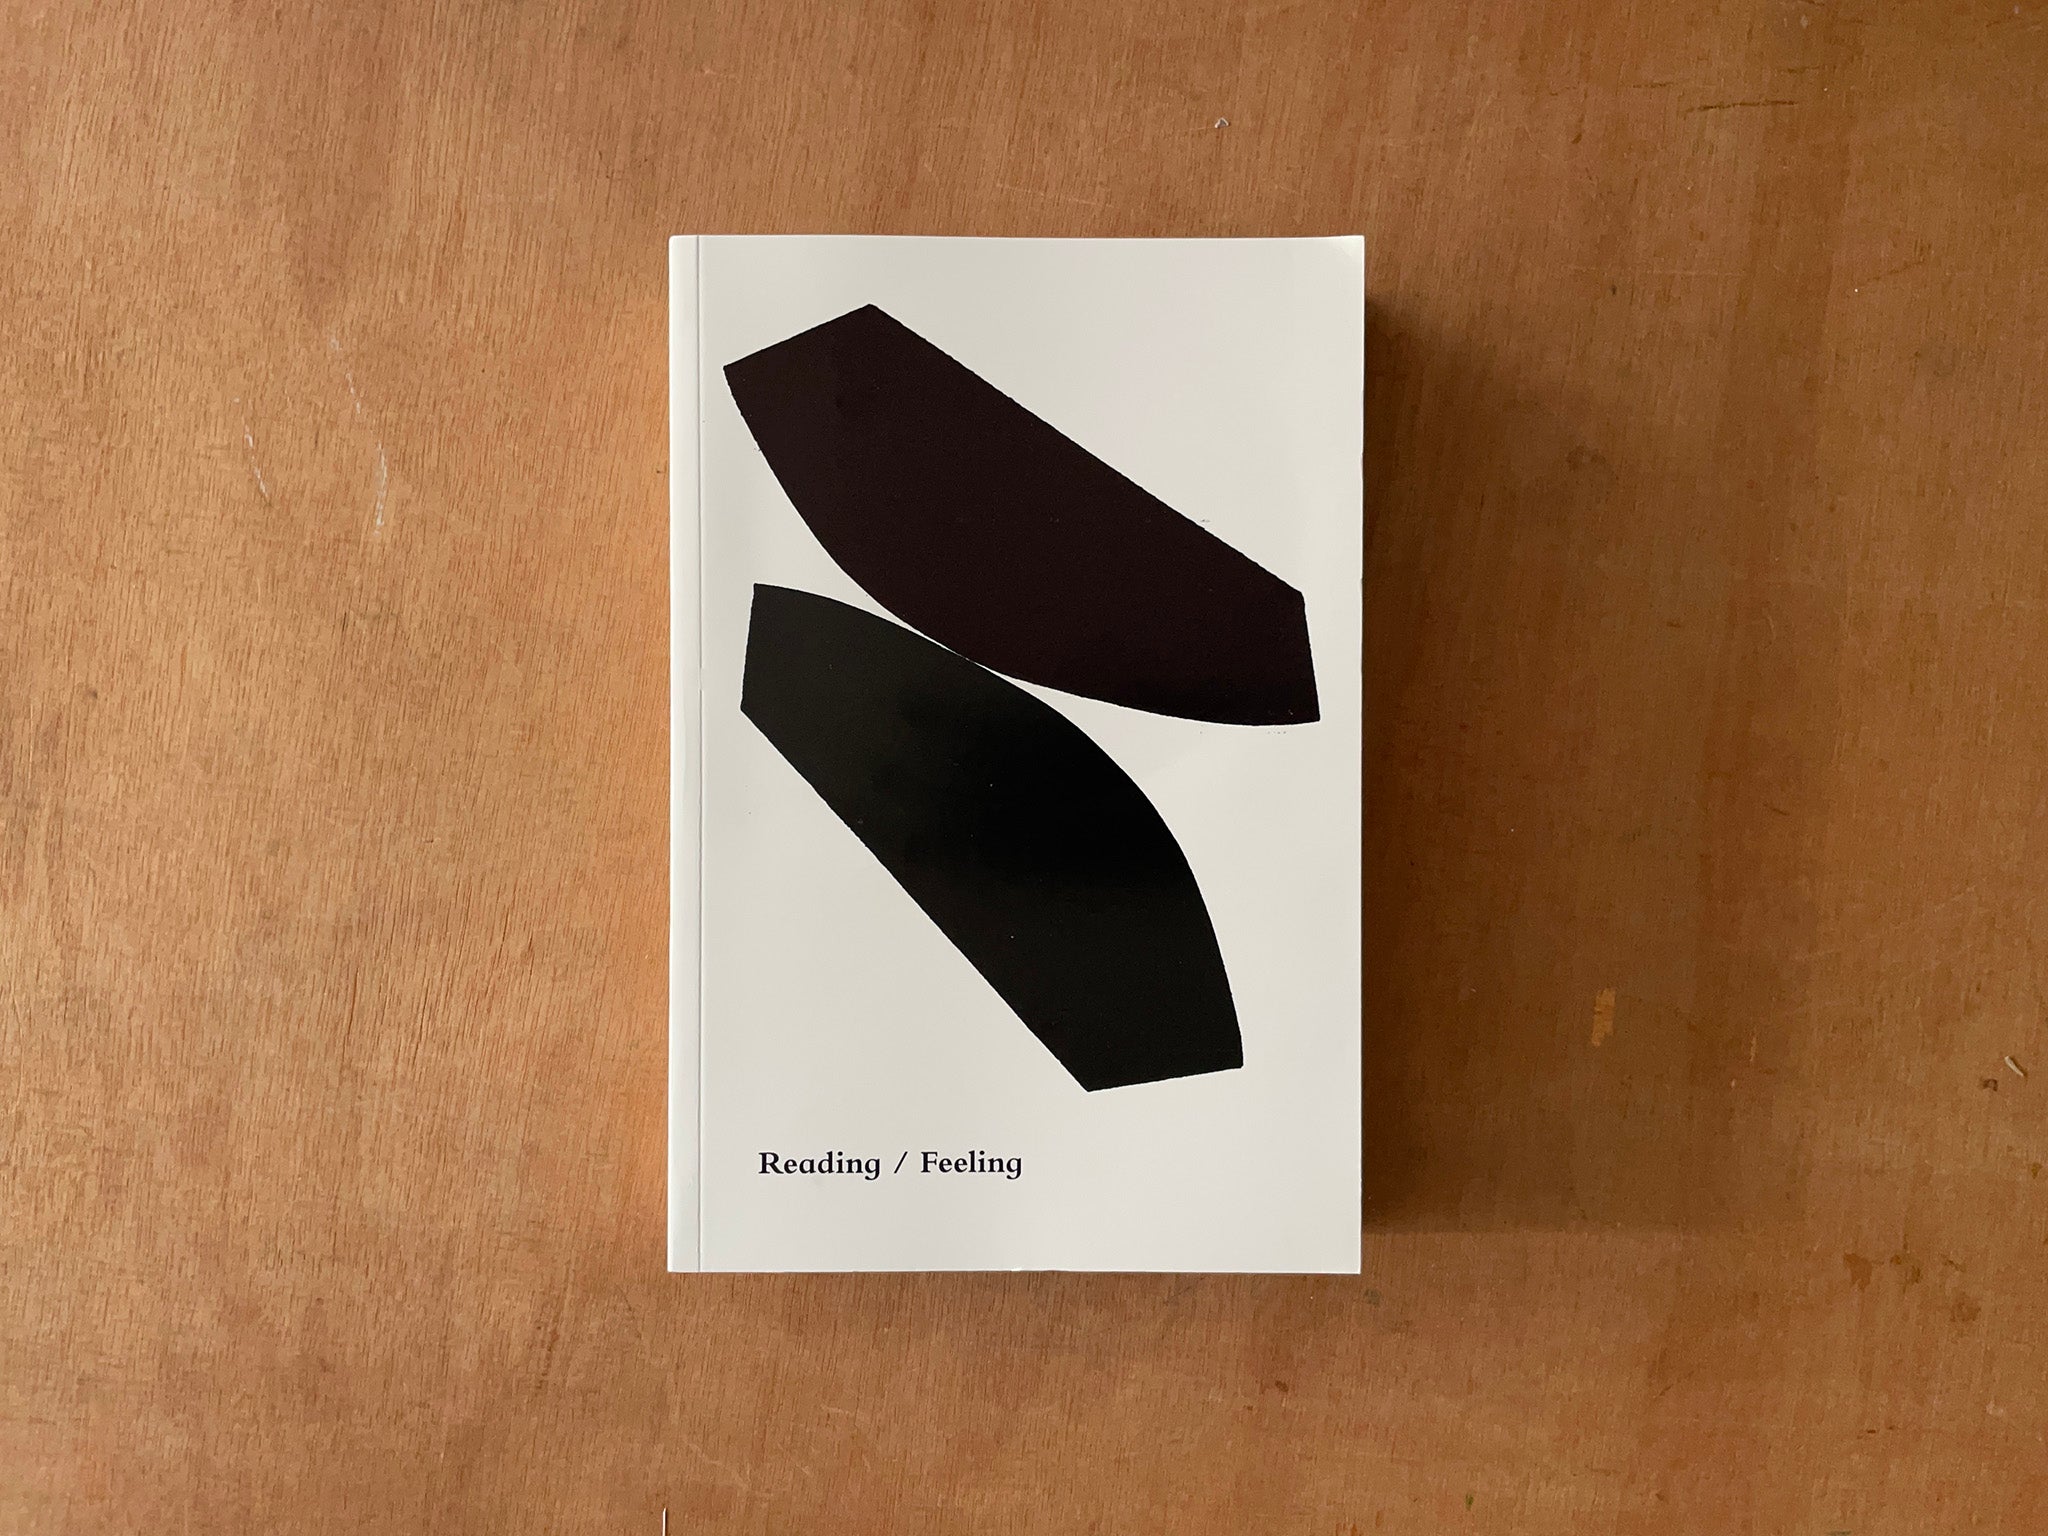 READING / FEELING edited by Tanja Baudoin, Frédérique Bergholtz, and Vivian Ziherl